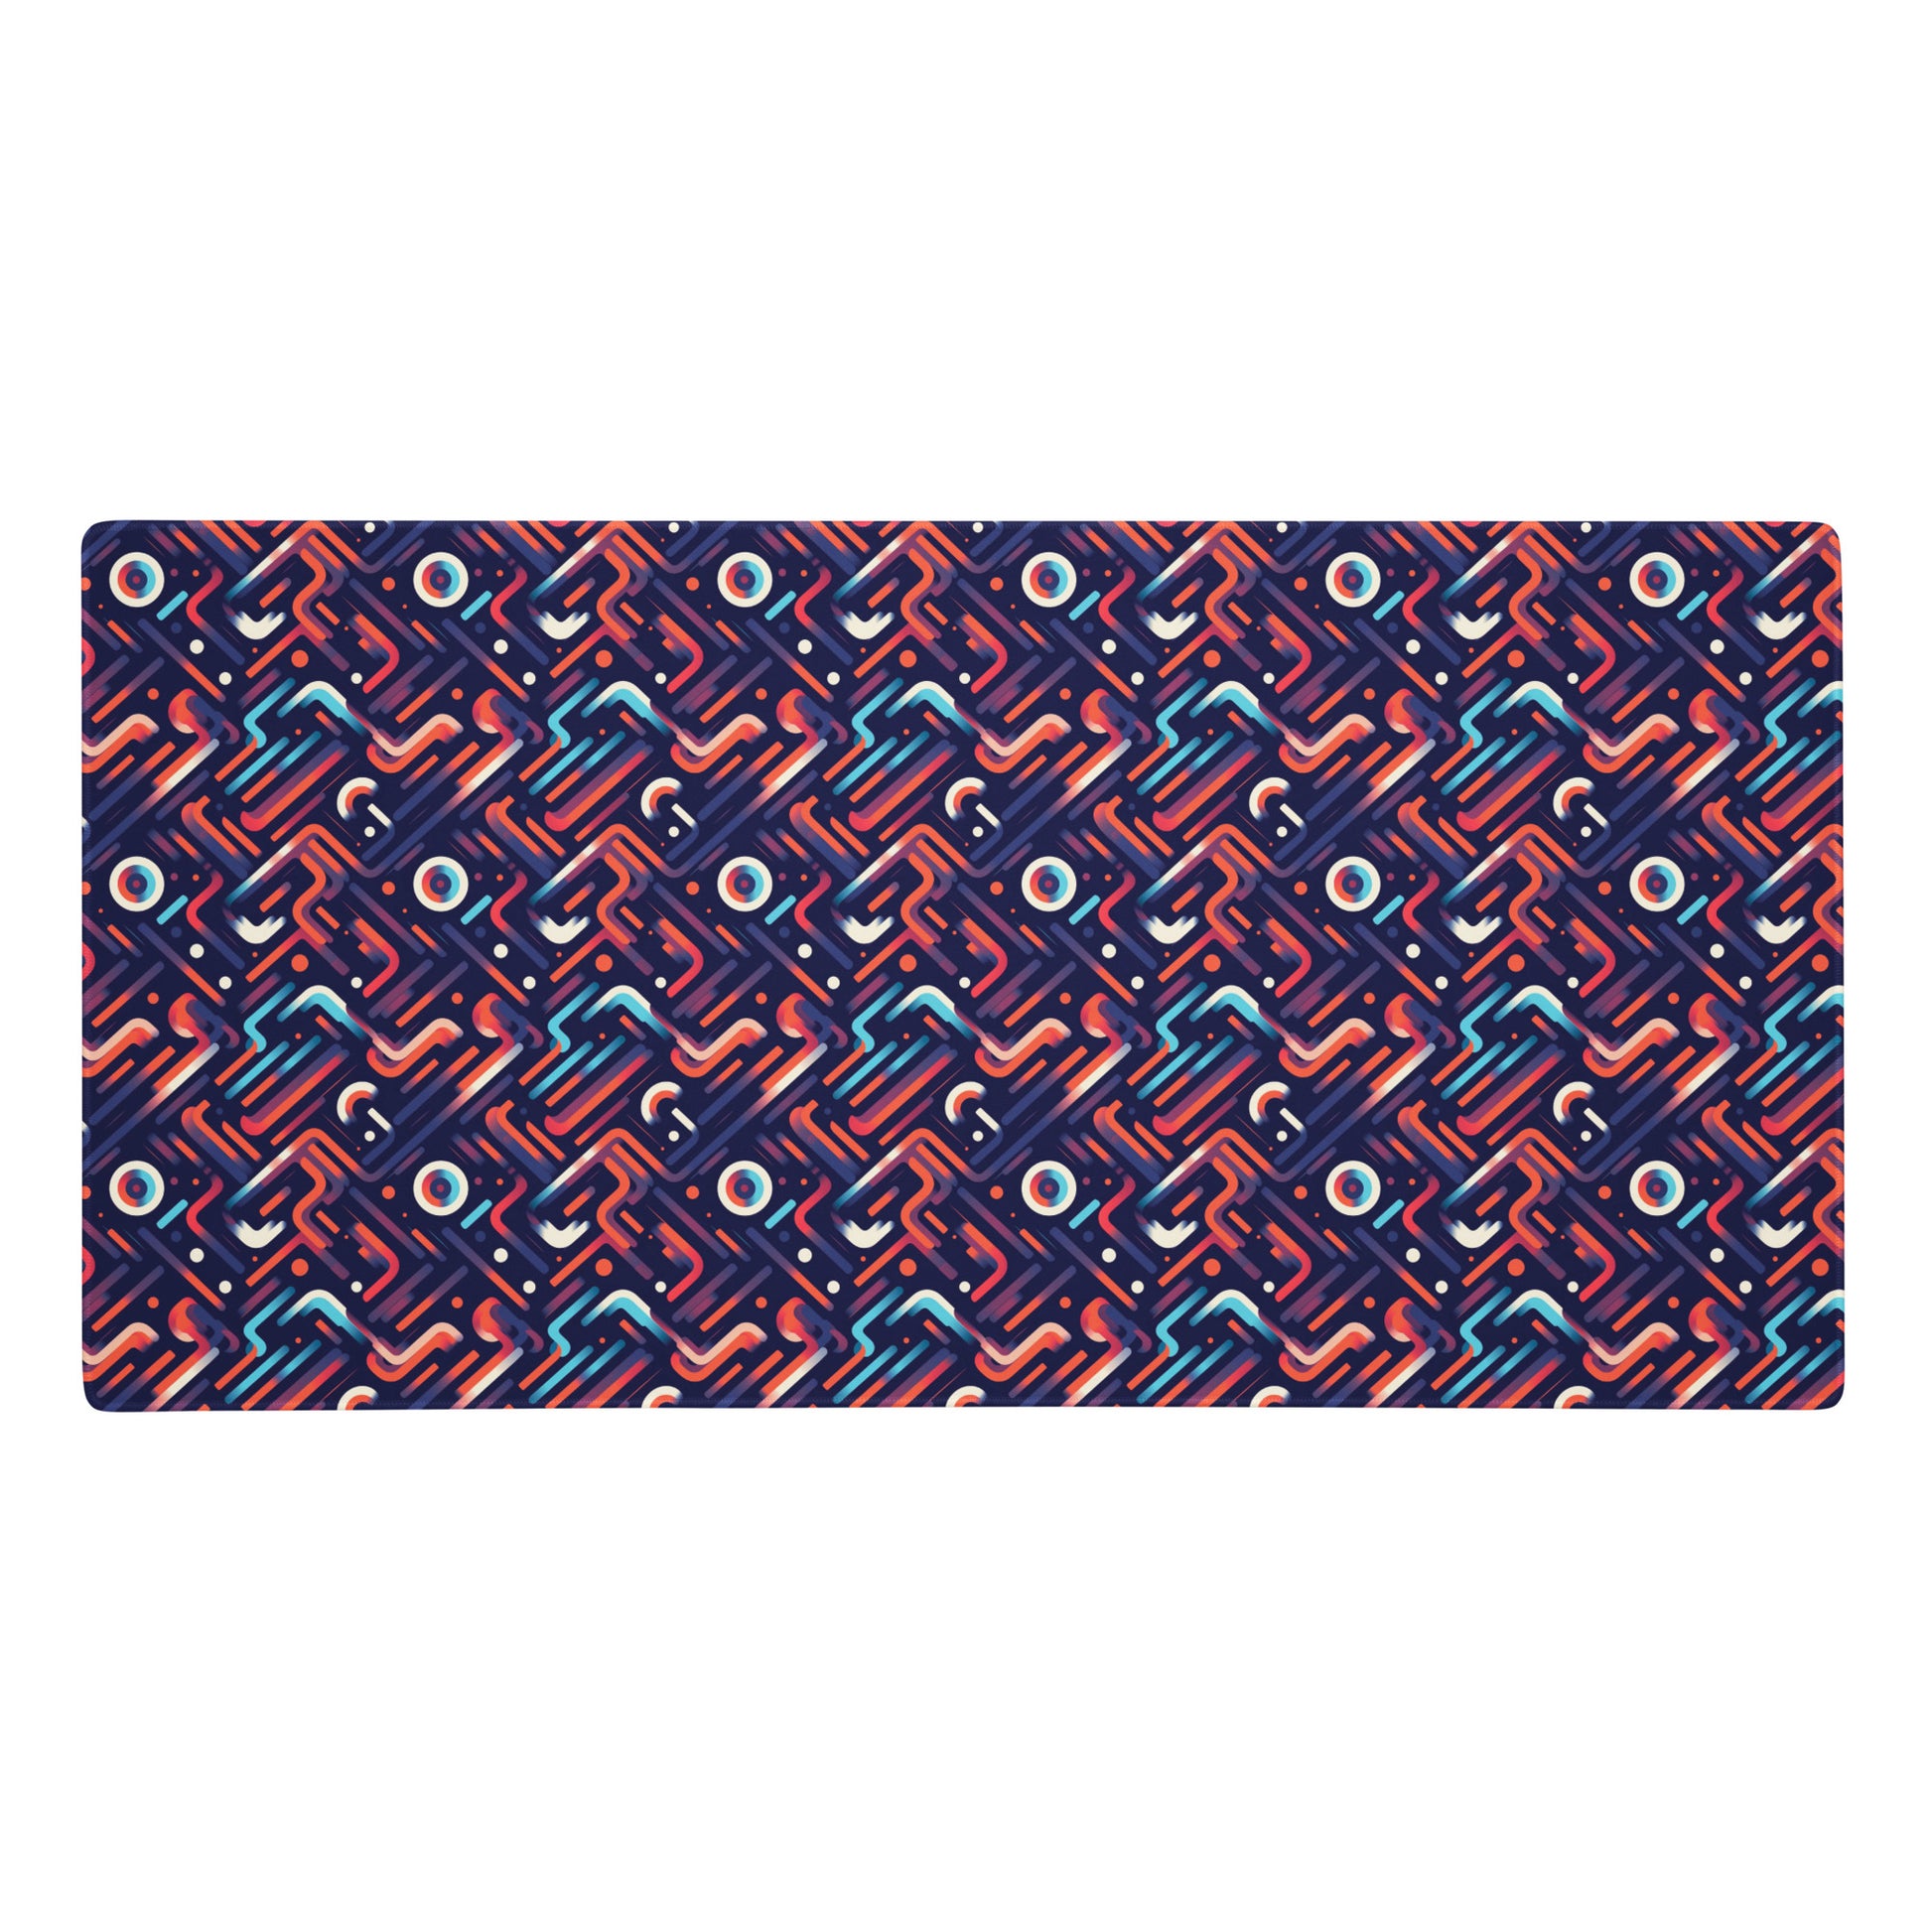 A 36" x 18" gaming desk pad with blue, orange, and purple lines on a dark blue background.